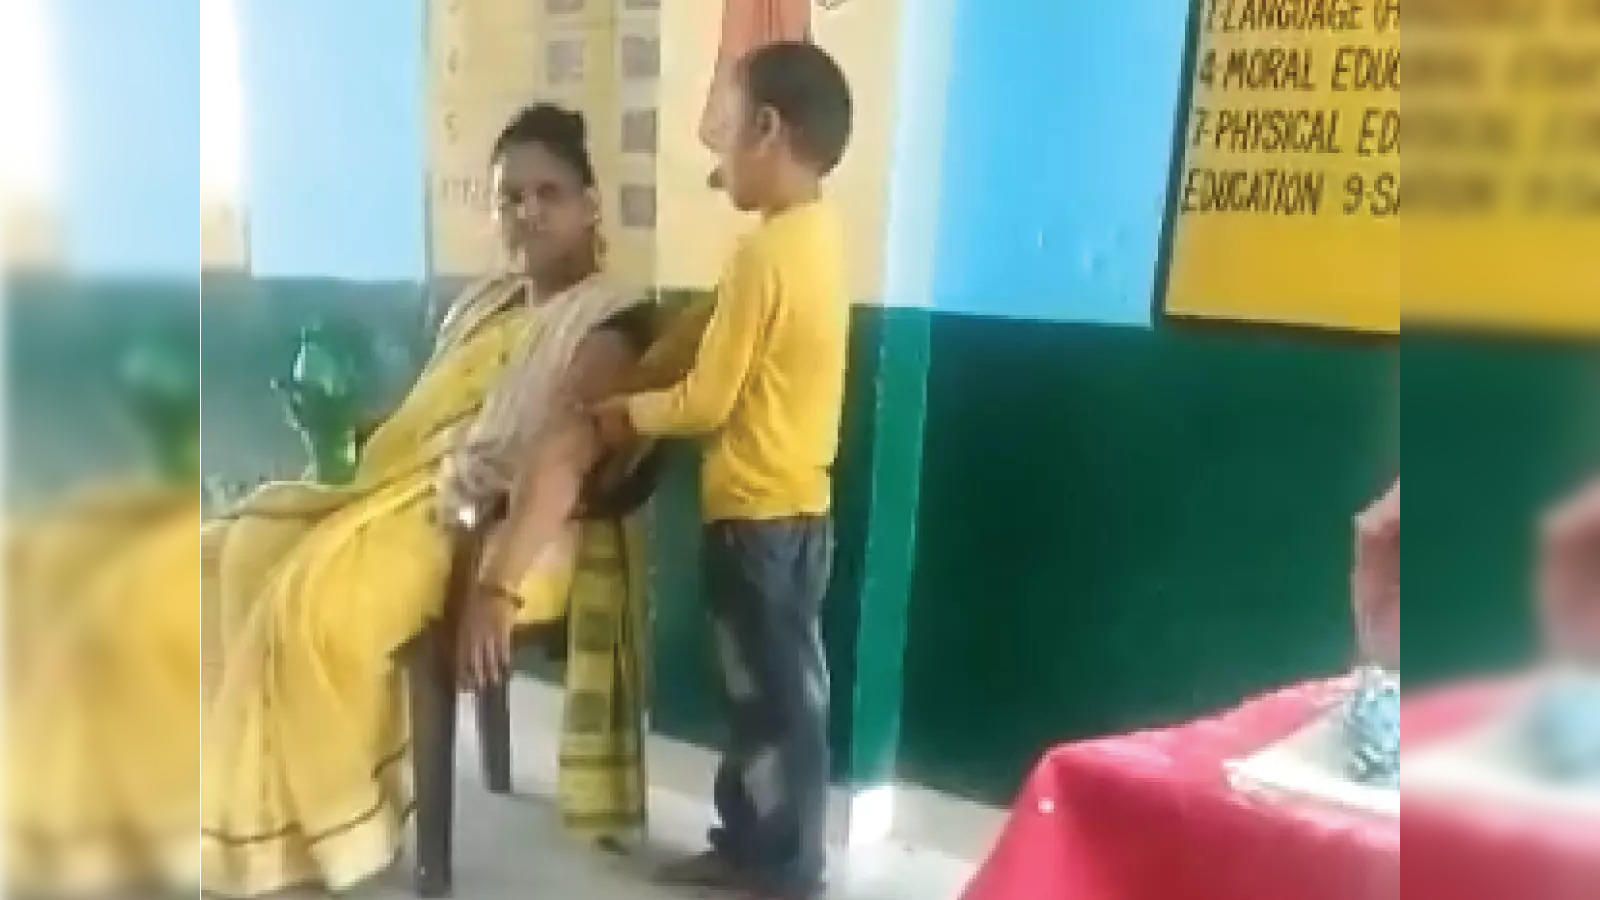 Teacher Andstudentgirl Xnxx - Teacher Massage: Teacher gets student to massage her arm, is suspended:  Viral video - The Economic Times